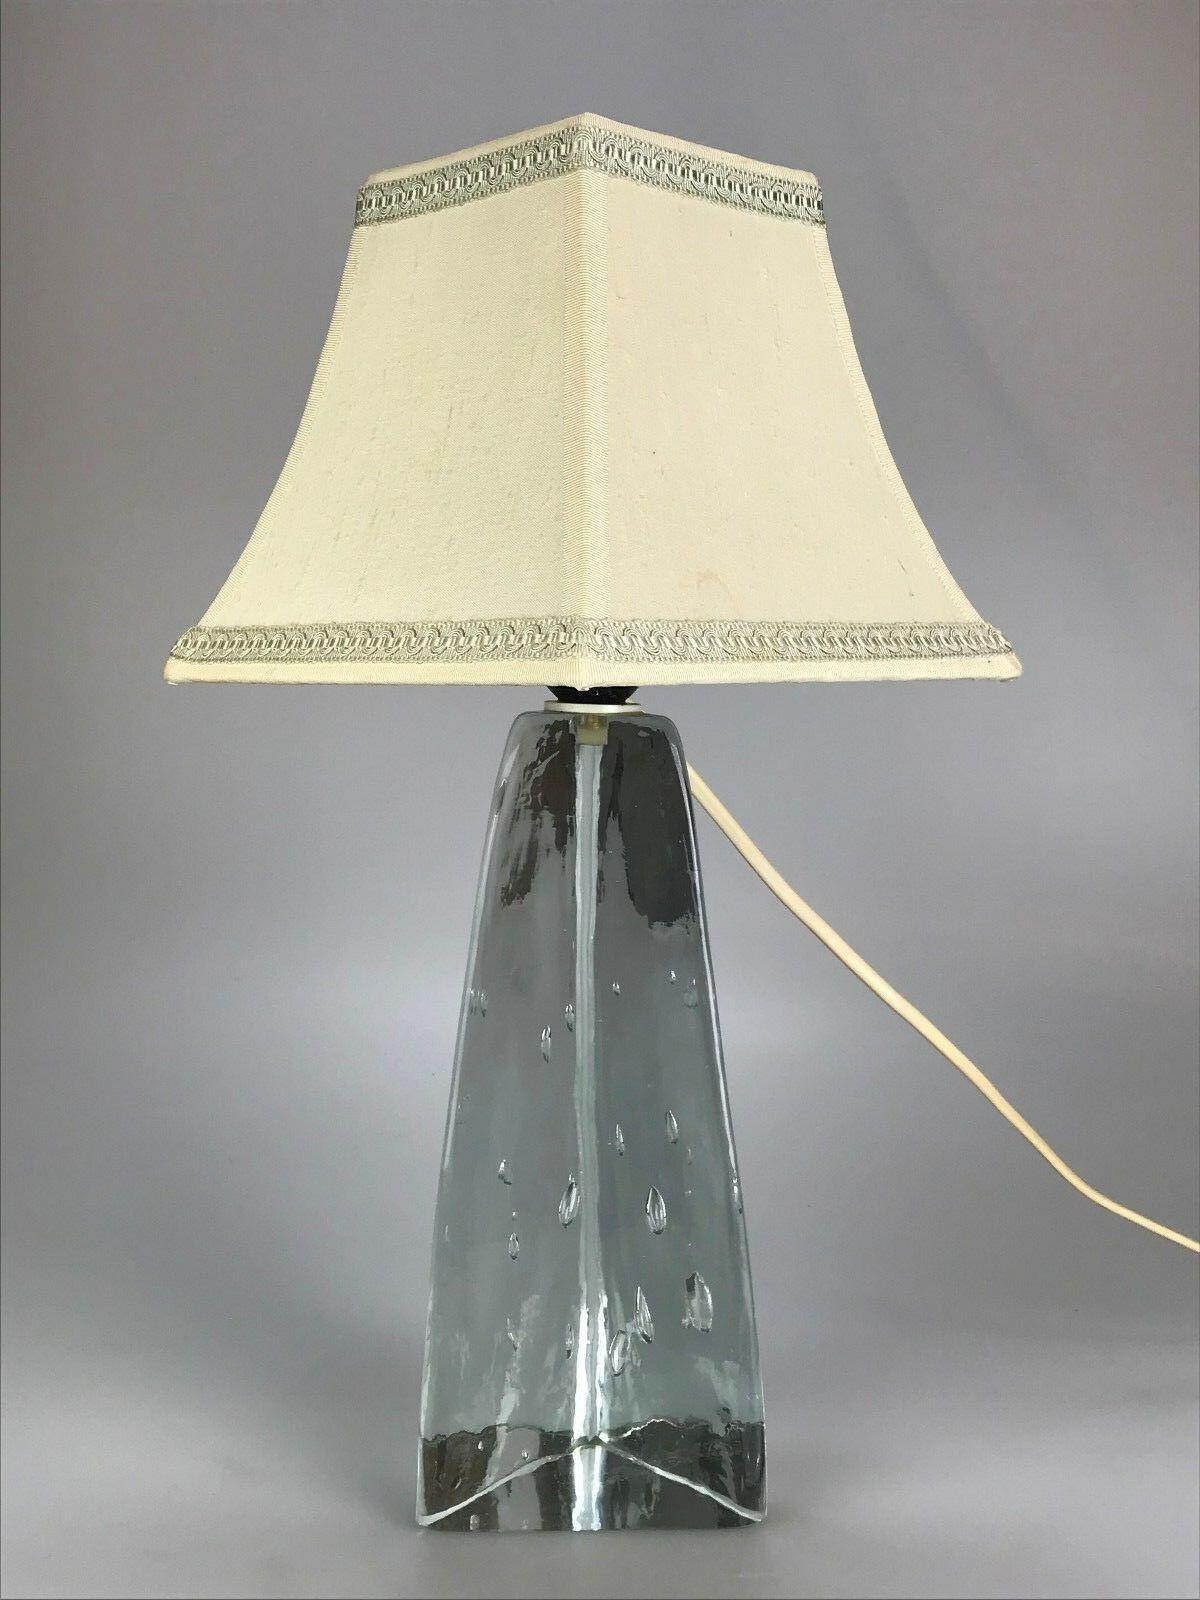 60s 70s lamp light table lamp table lamp glass space age design 60s

Object: table lamp

Manufacturer:

Condition: good

Age: around 1960-1970

Dimensions:

29cm x 29cm x 43.5cm

Other notes:

The pictures serve as part of the